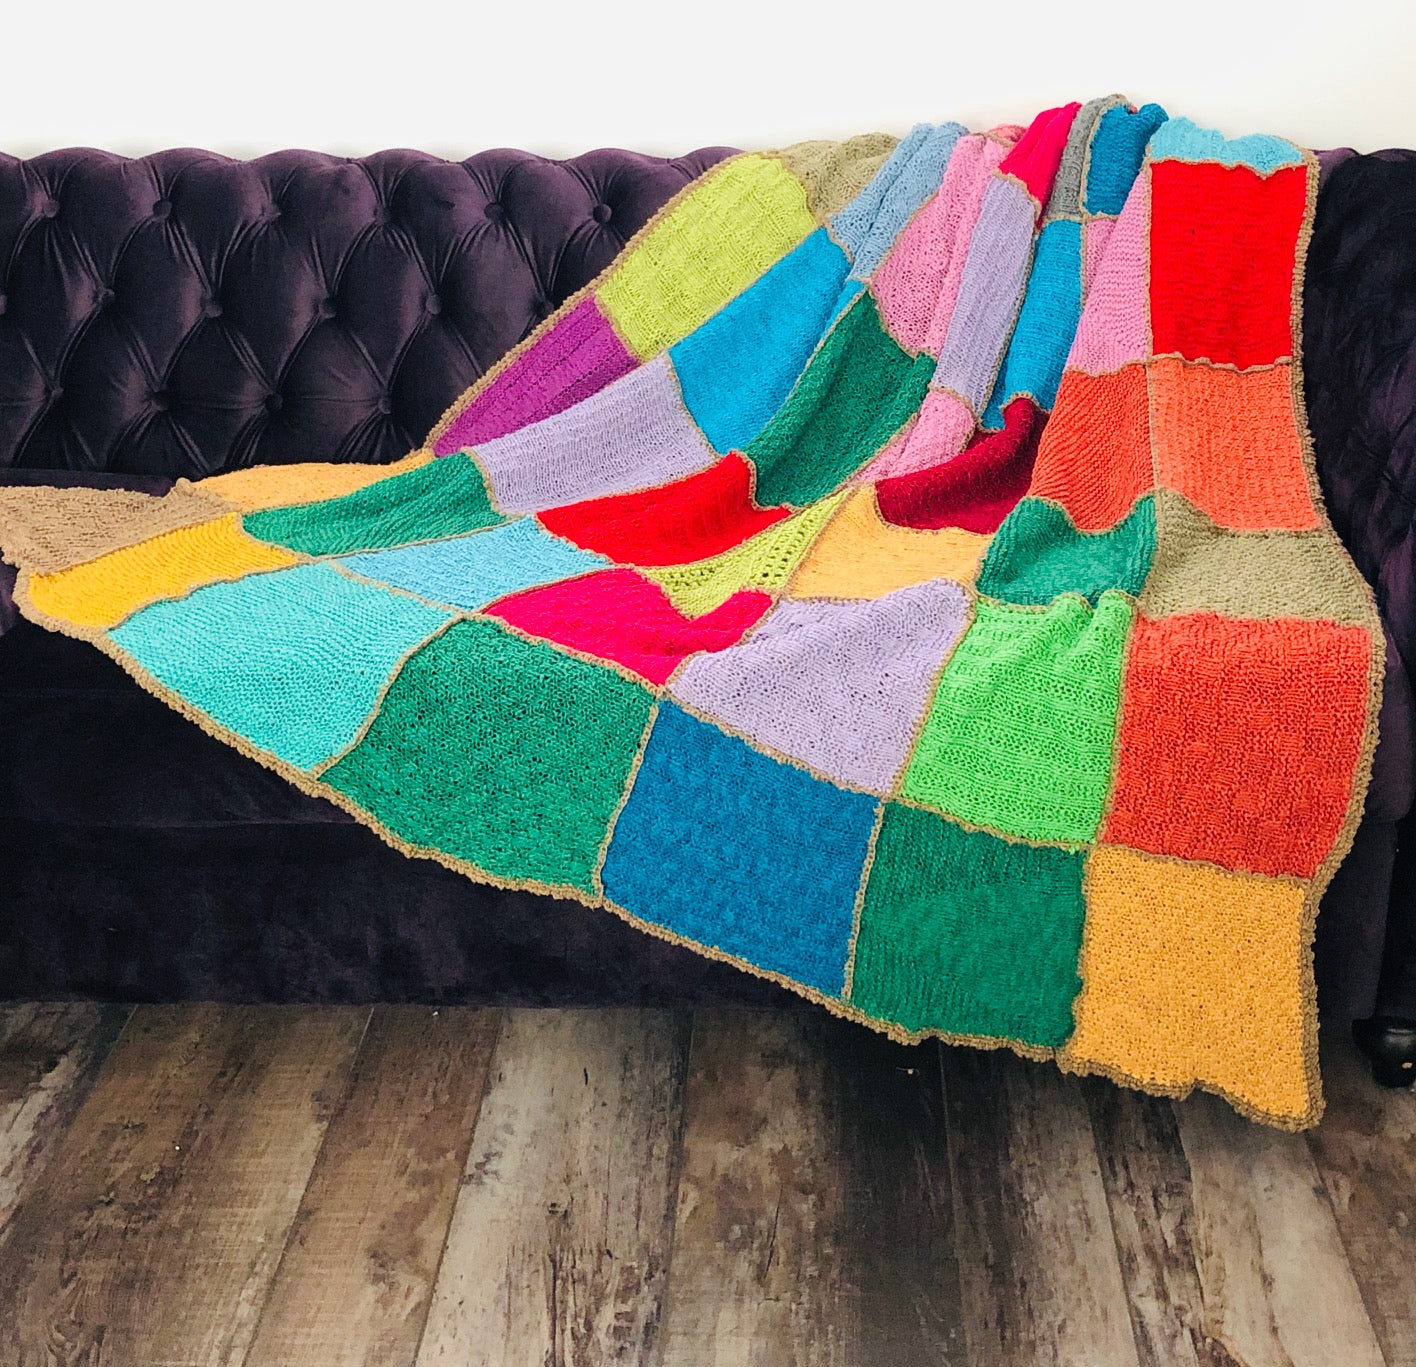 Free Pattern Friday: Knit-a-Squares